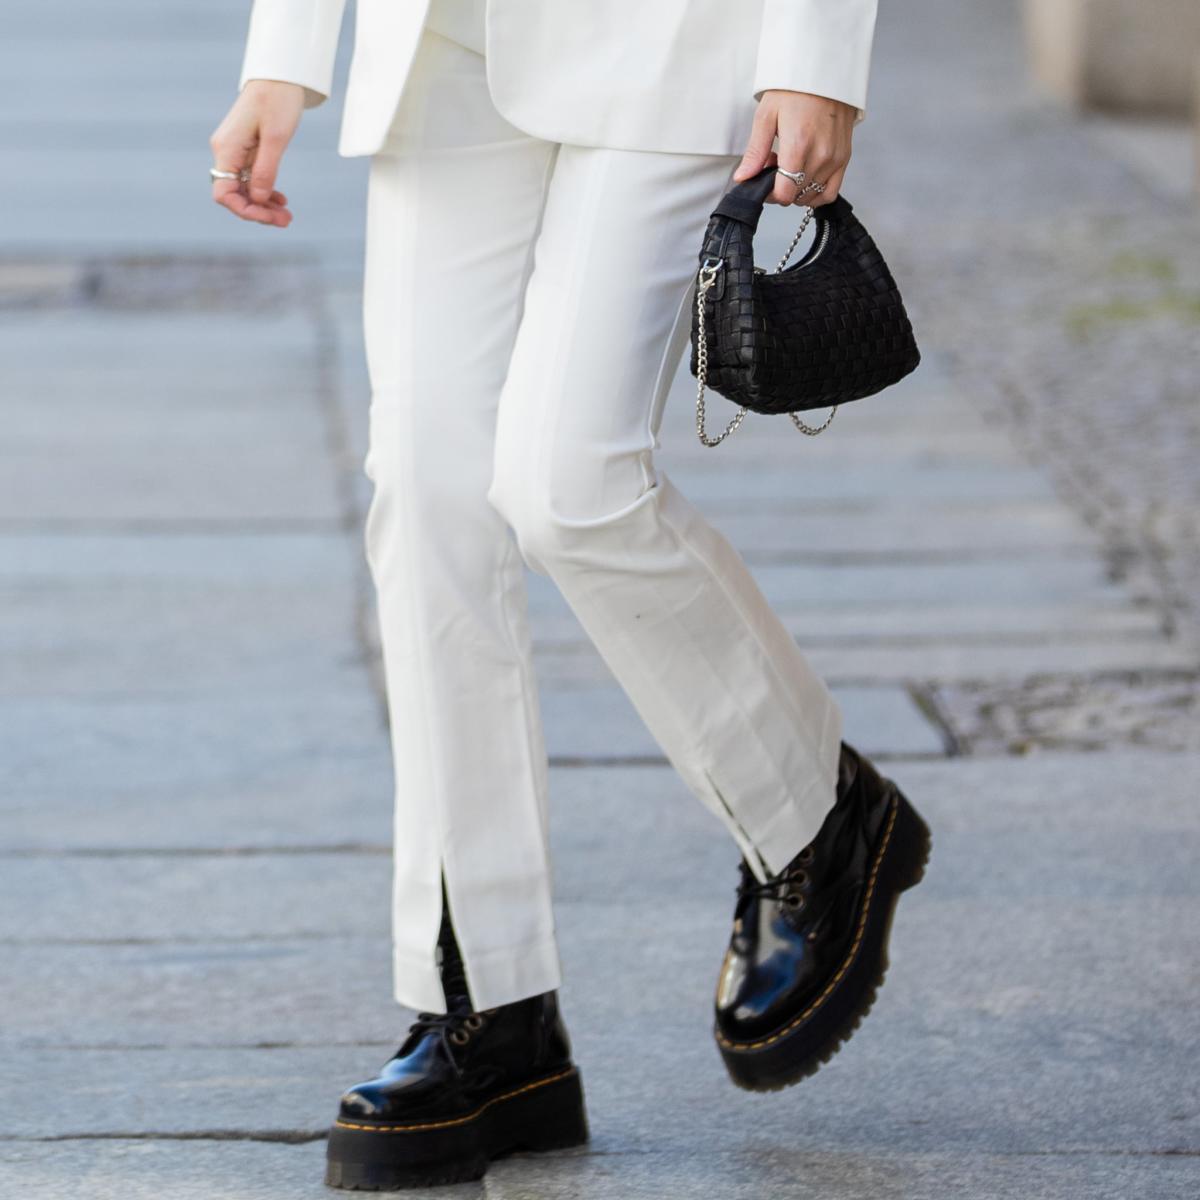 Ways to Style an Outfit Around Your Doc